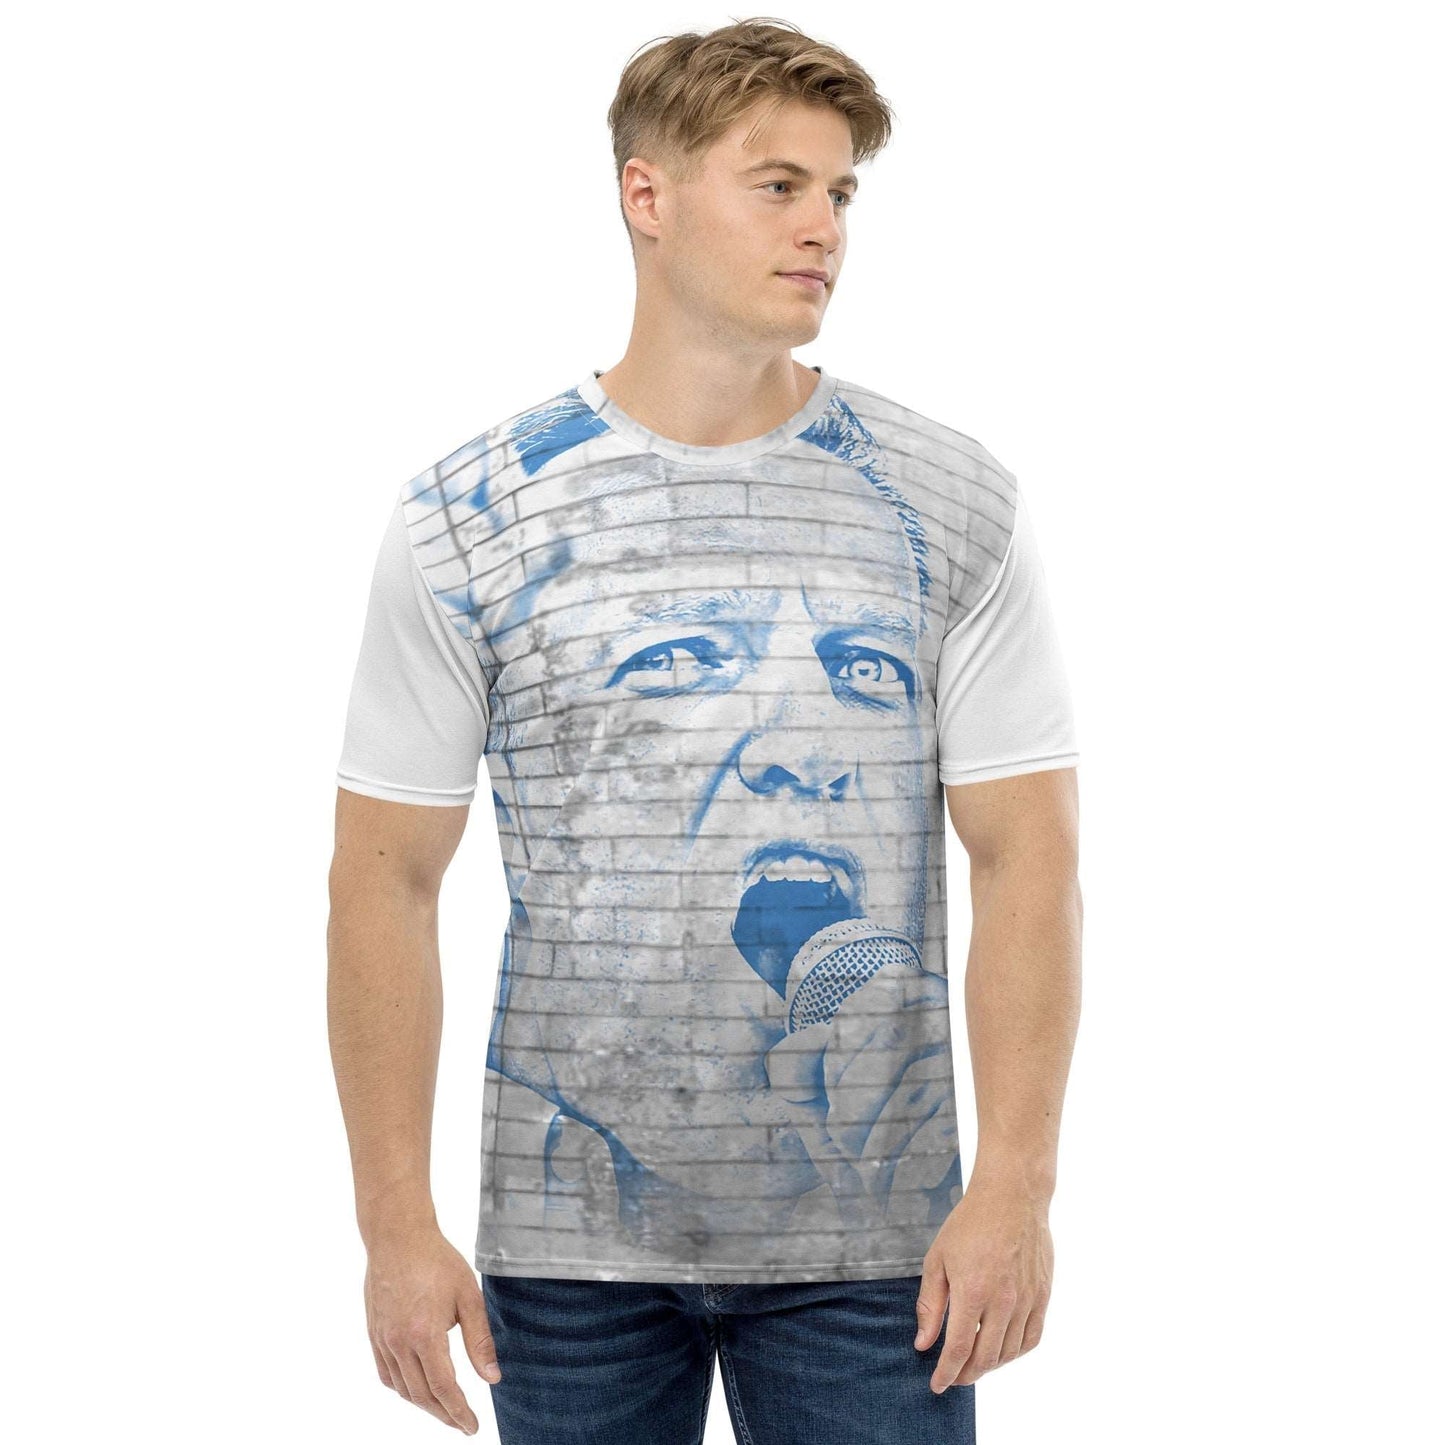 Alexei Navalny All-Over Print Men's Crew Neck T-Shirt - Souled Out World